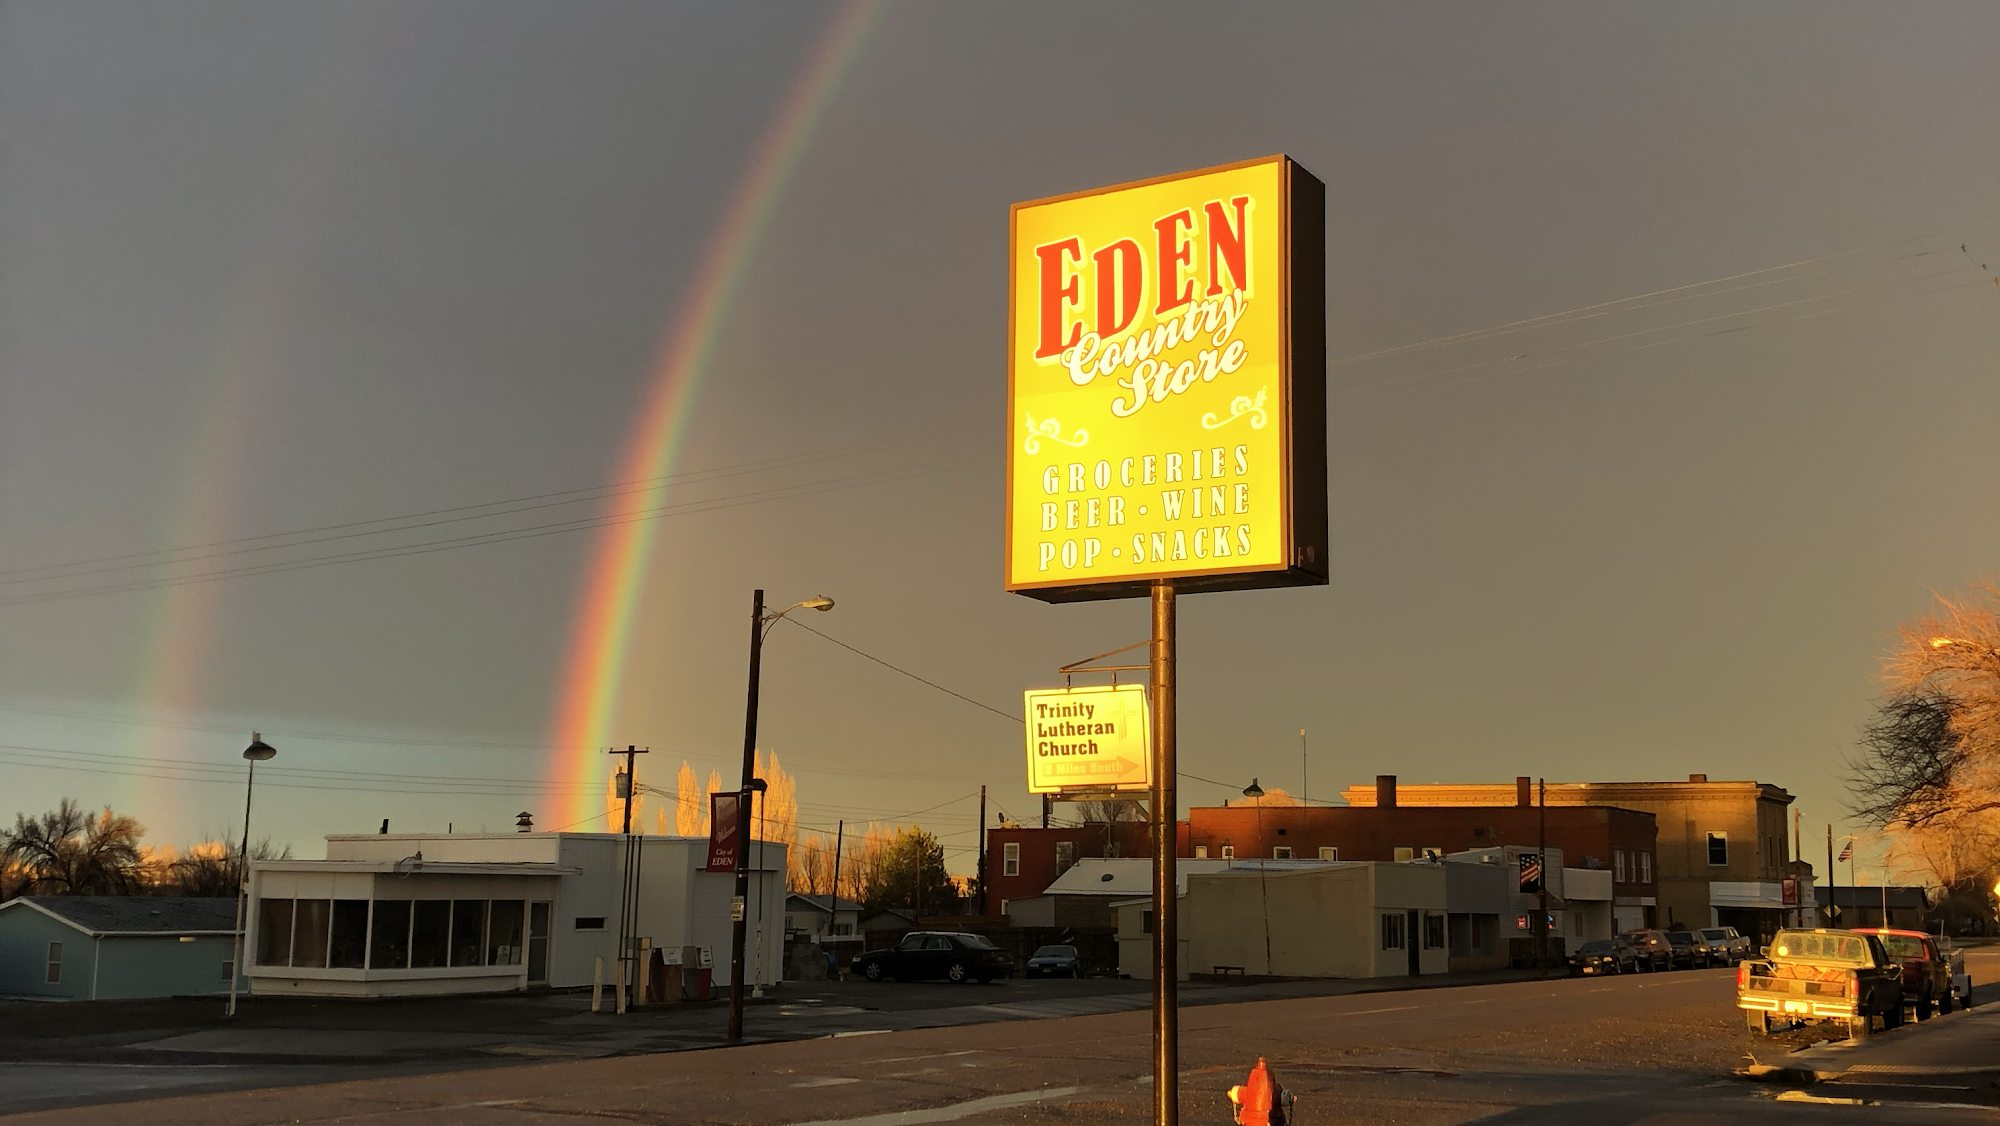 Eden Country Store